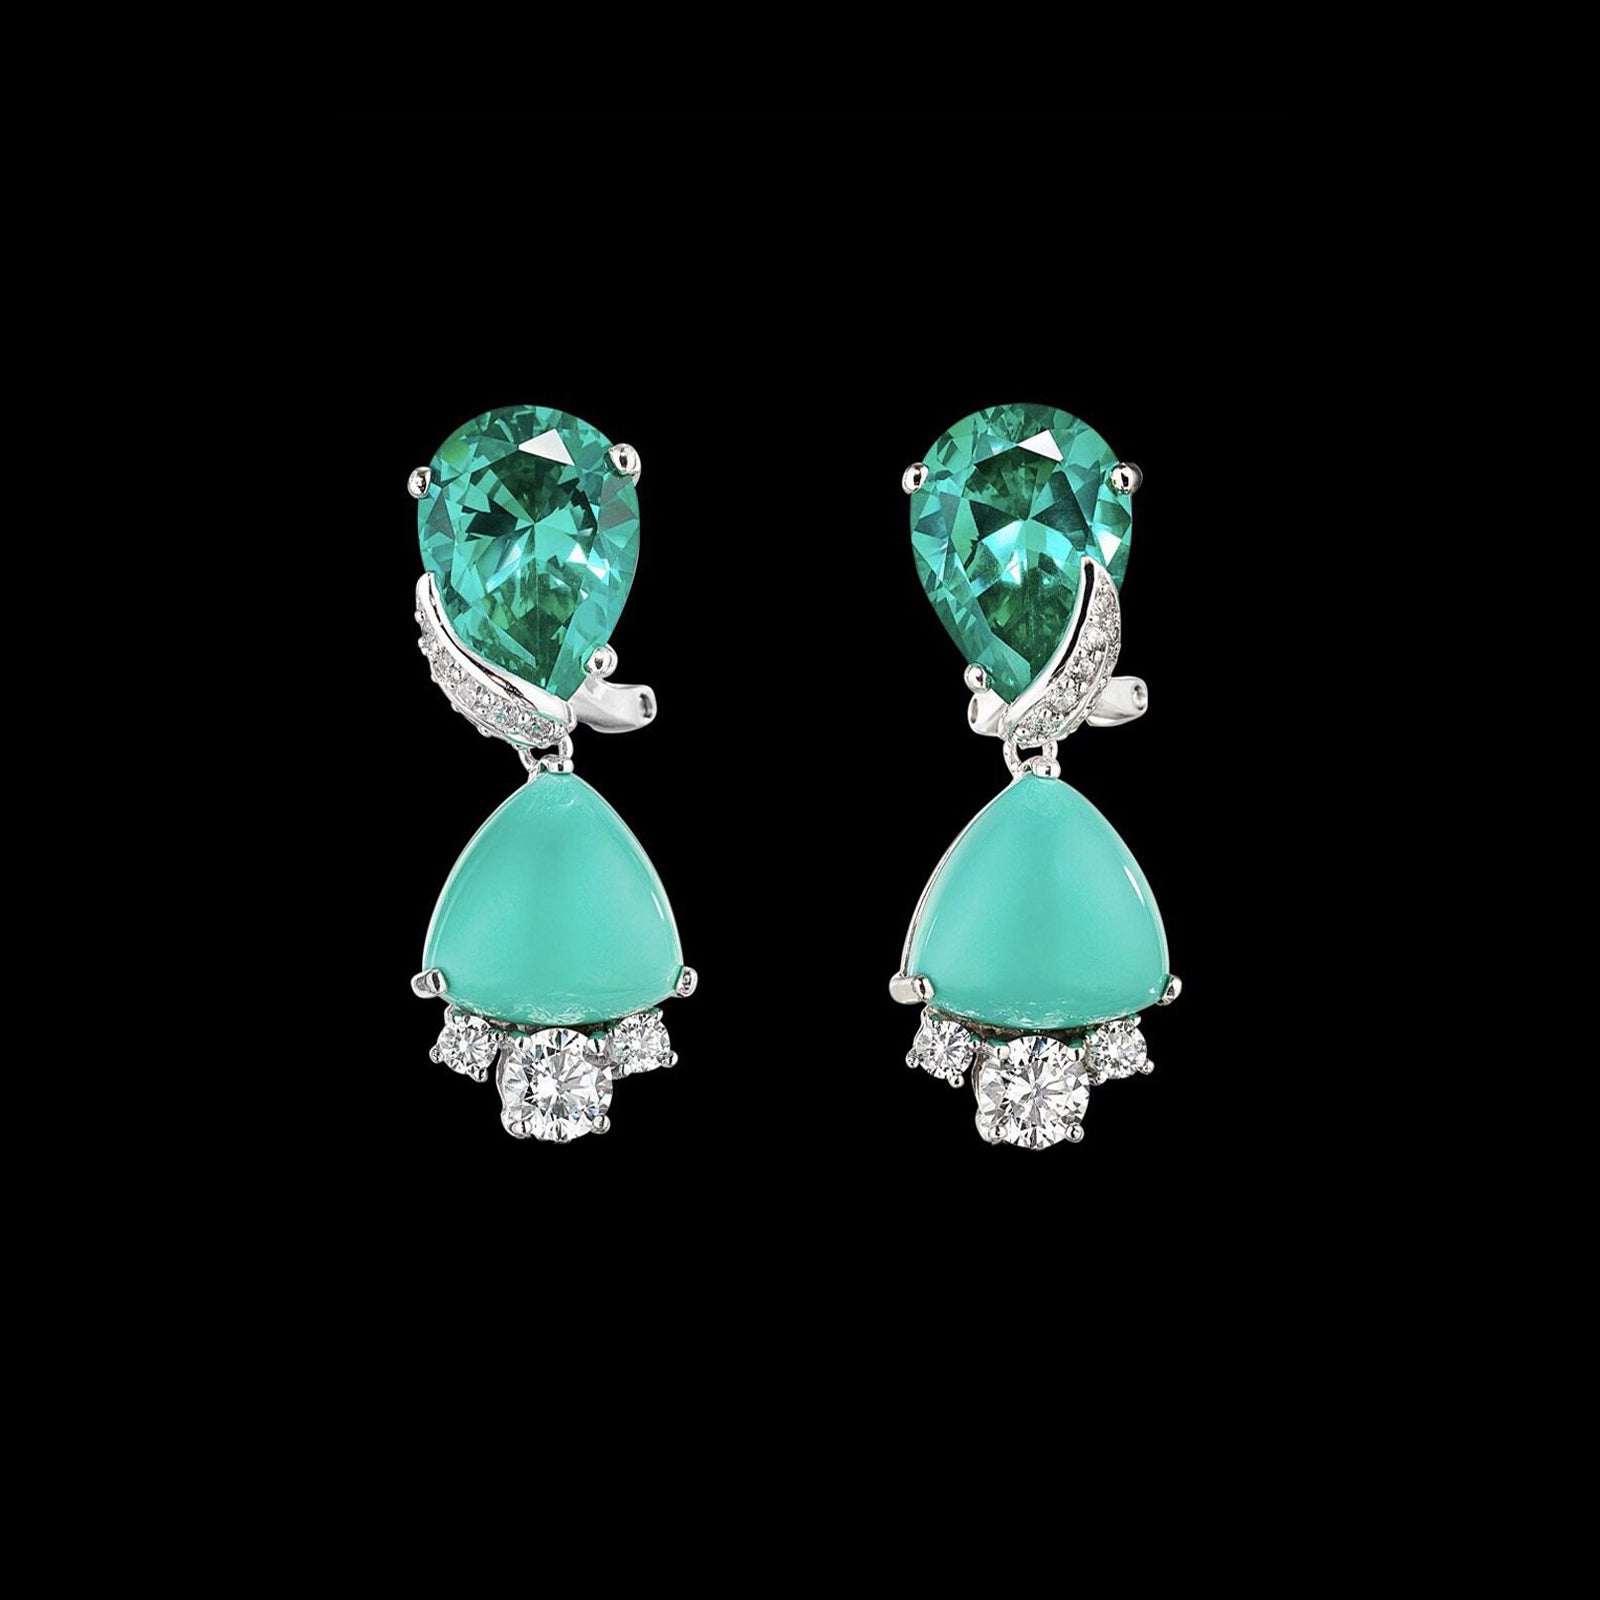 Paraiba Berry Earrings, Earring, Anabela Chan Joaillerie - Fine jewelry with laboratory grown and created gemstones hand-crafted in the United Kingdom. Anabela Chan Joaillerie is the first fine jewellery brand in the world to champion laboratory-grown and created gemstones with high jewellery design, artisanal craftsmanship and a focus on ethical and sustainable innovations.